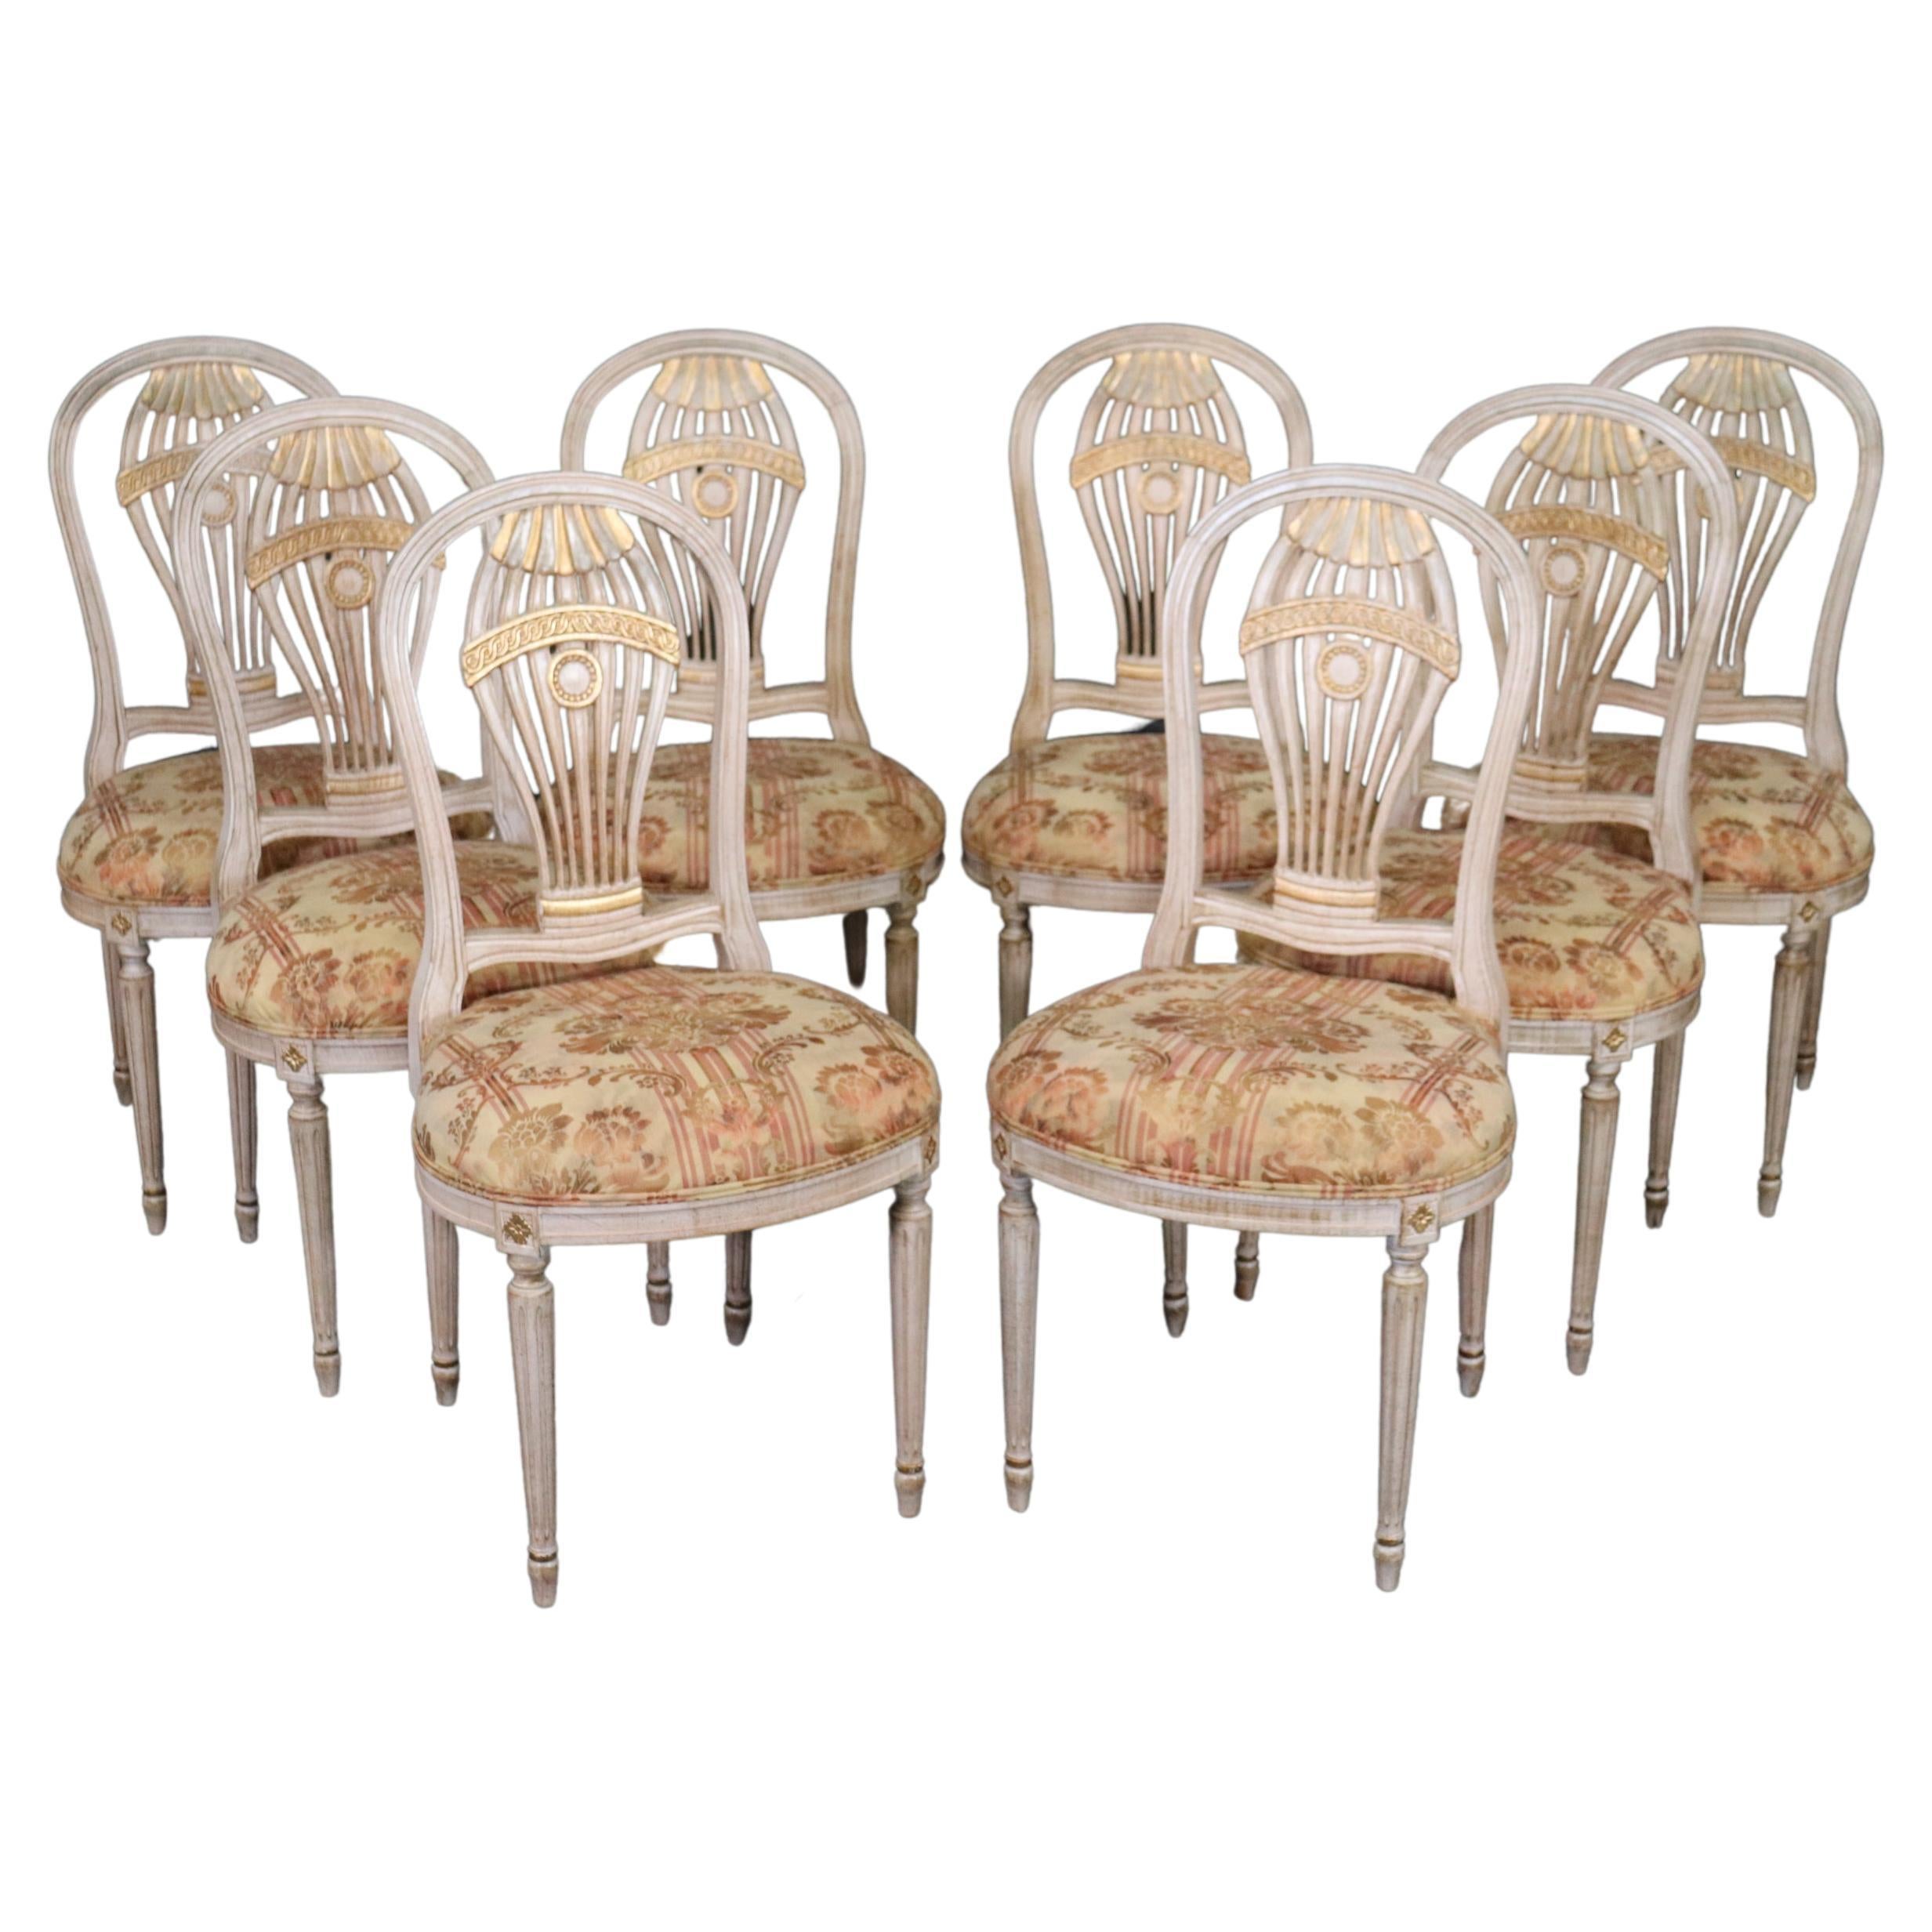 Superb Set of 8 Maison Jansen Attributed Set Painted Gilded Dining Chairs